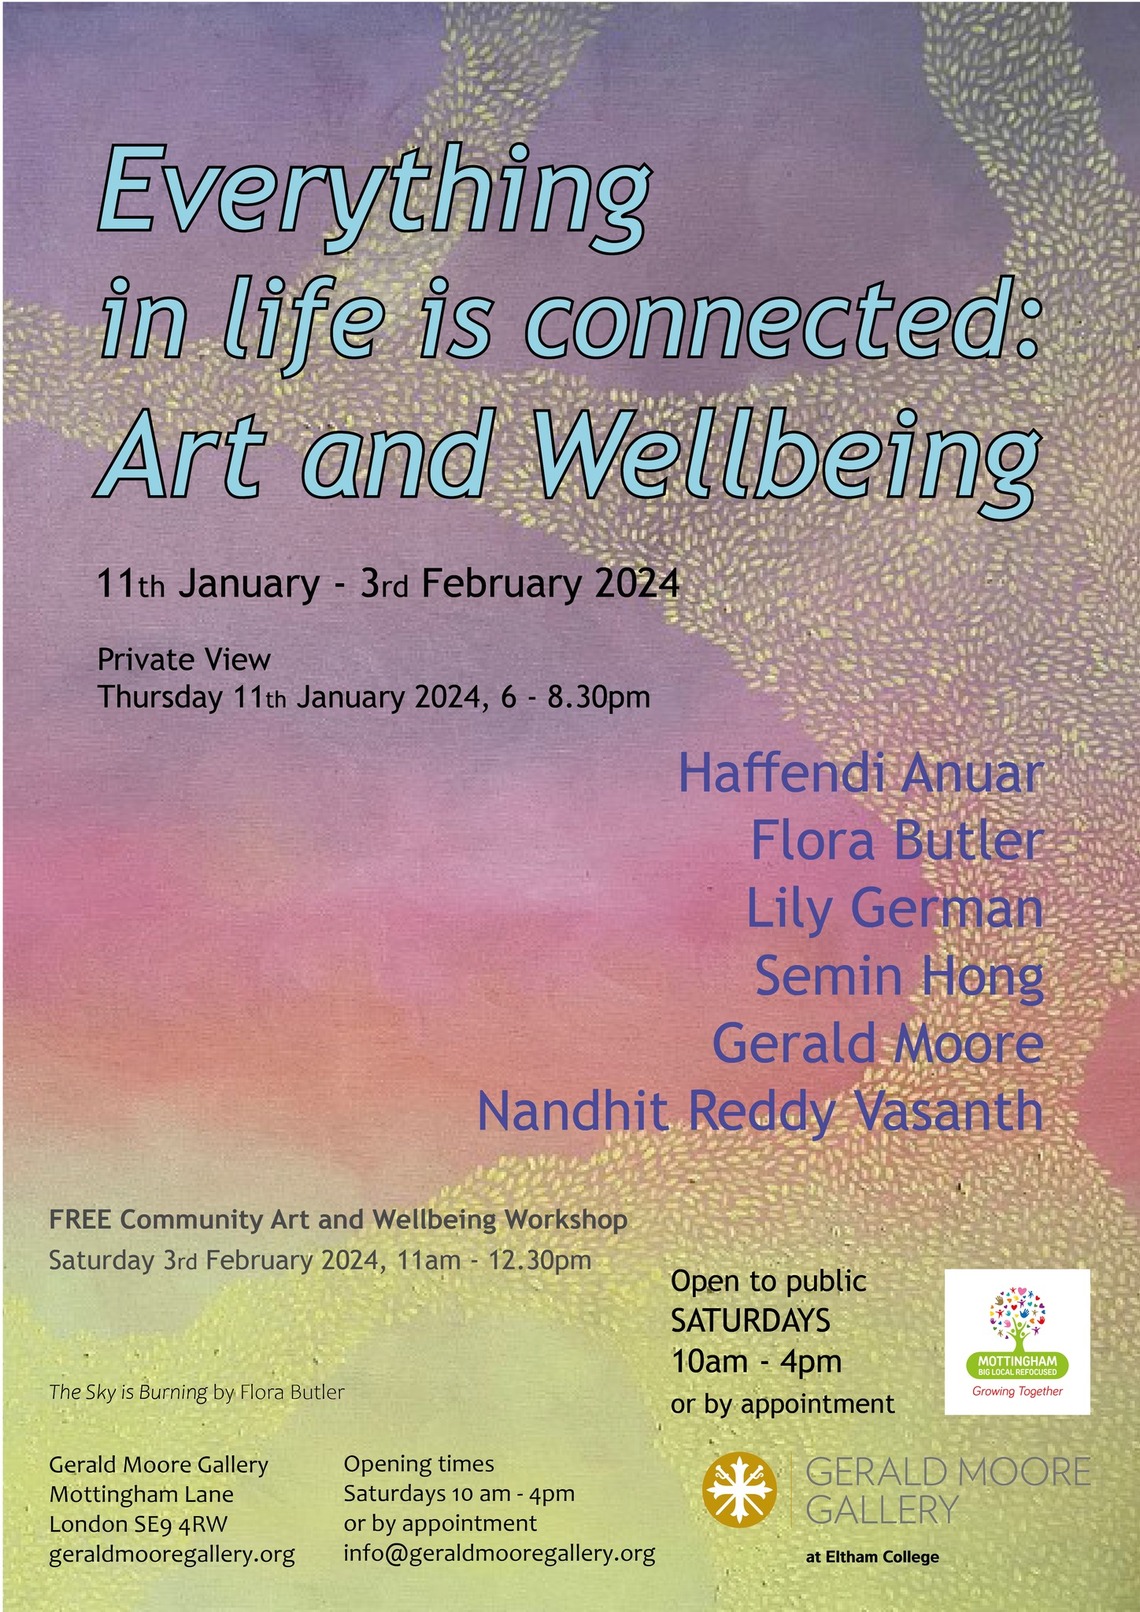 Art and Wellbeing